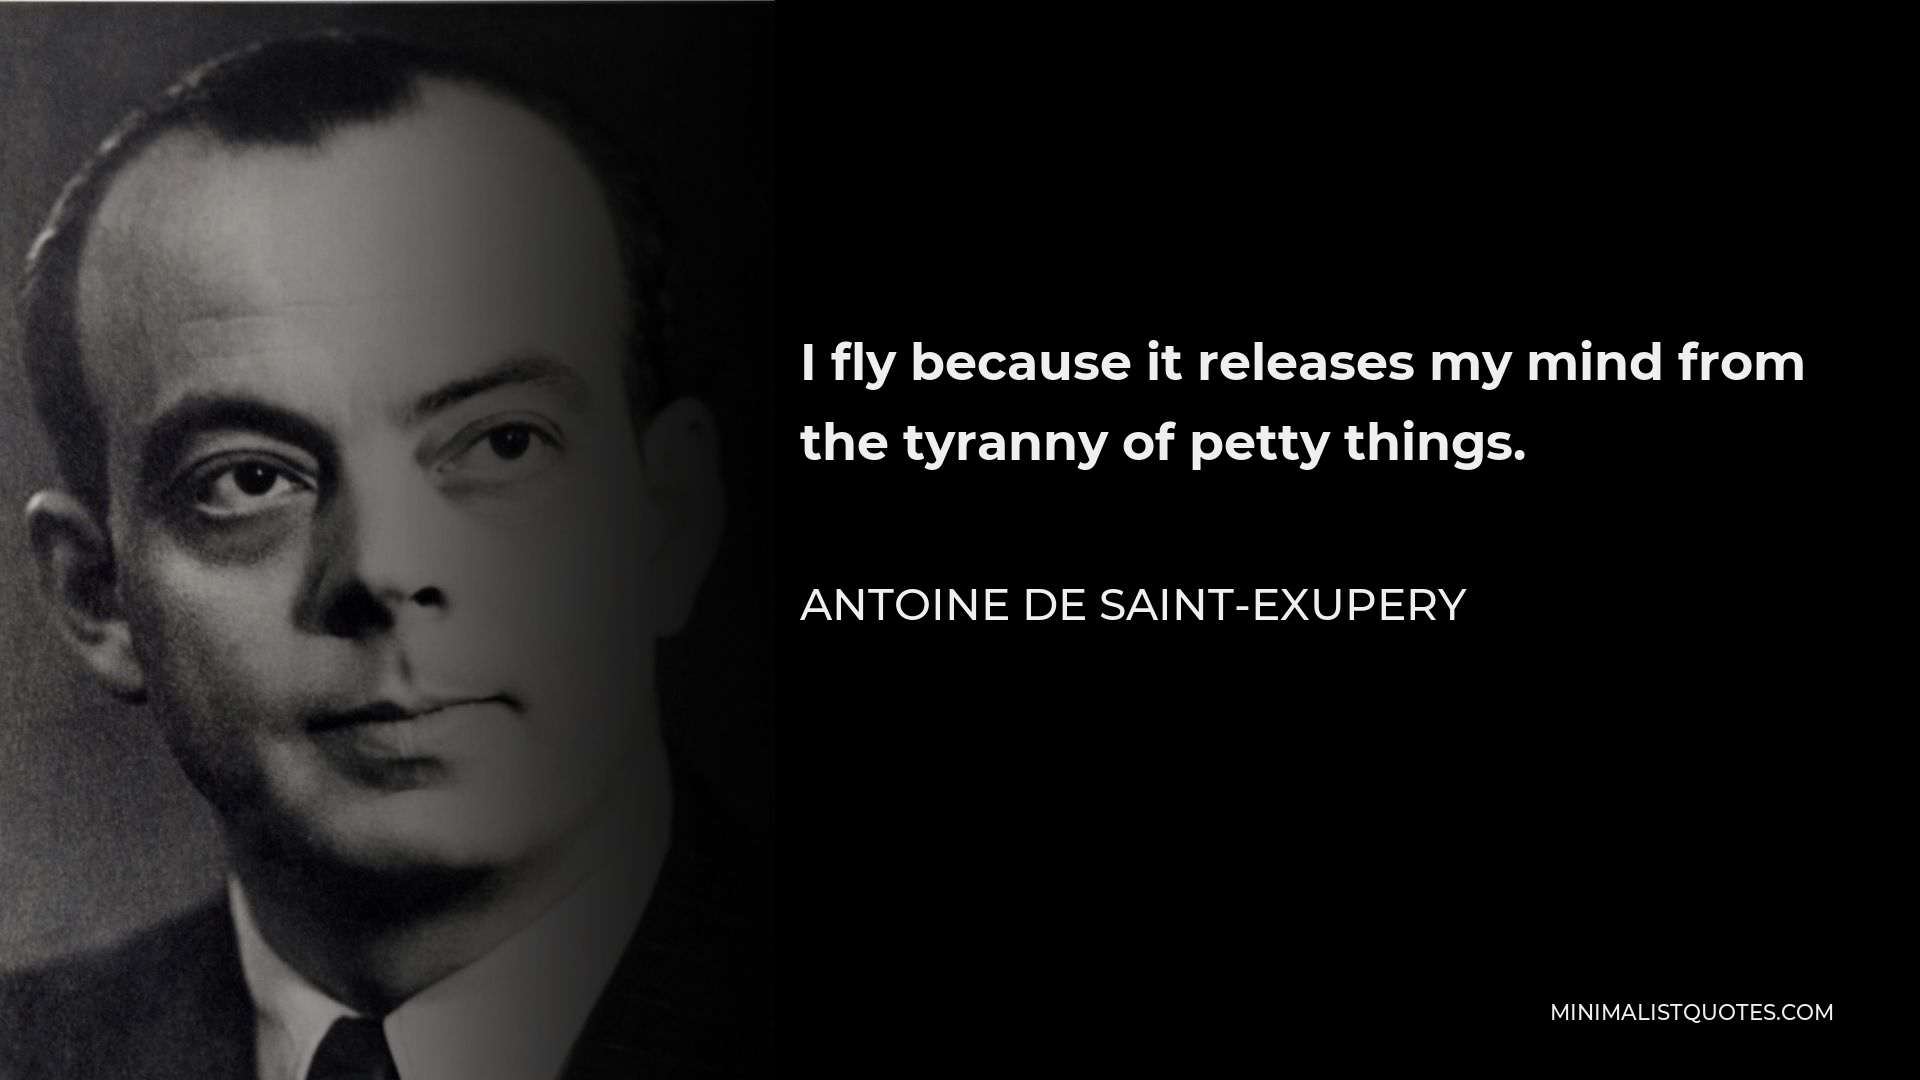 Antoine de Saint-Exupery Quote - I fly because it releases my mind from the tyranny of petty things.